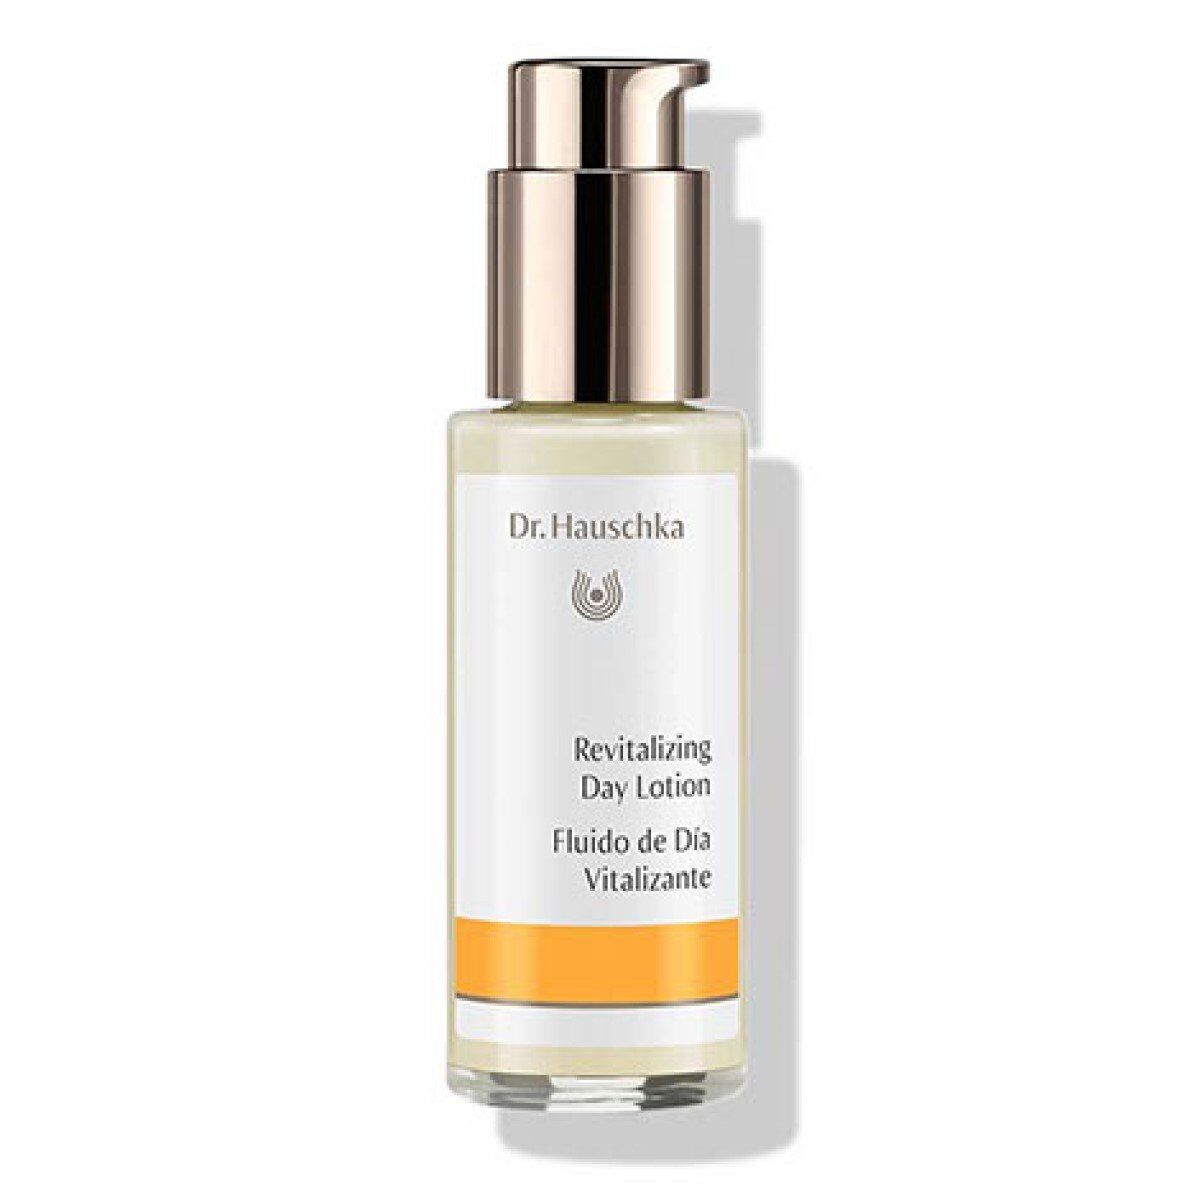 Dr. Hauschka - Revitalizing Day Lotion